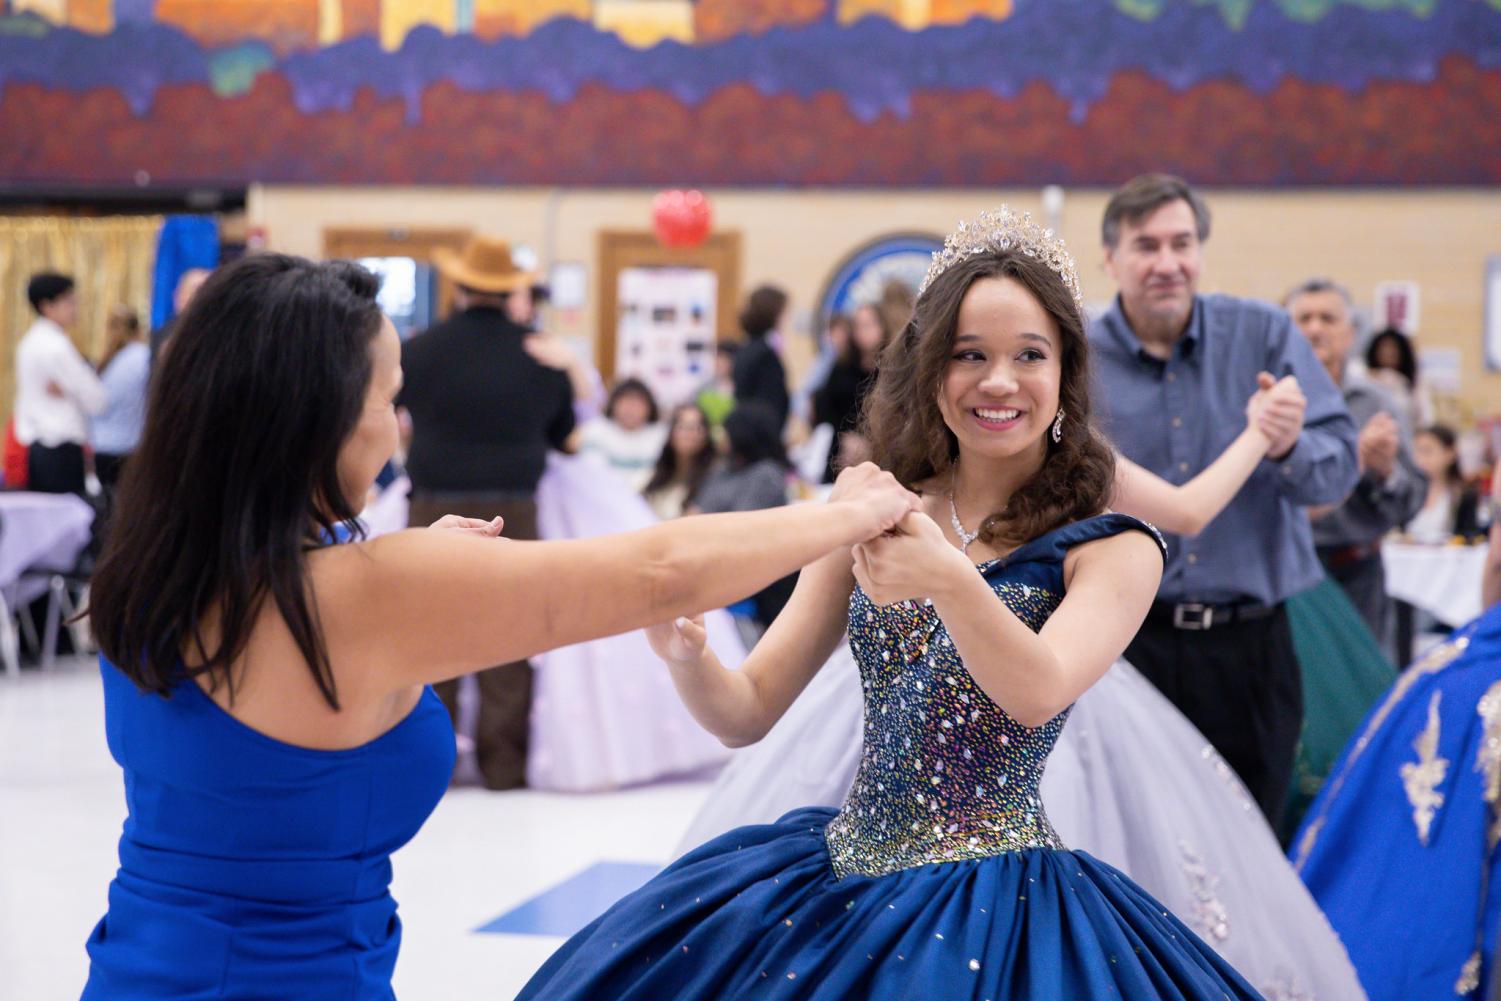 Not Having A Quince Is OK: 5 Latine Women Explain Why